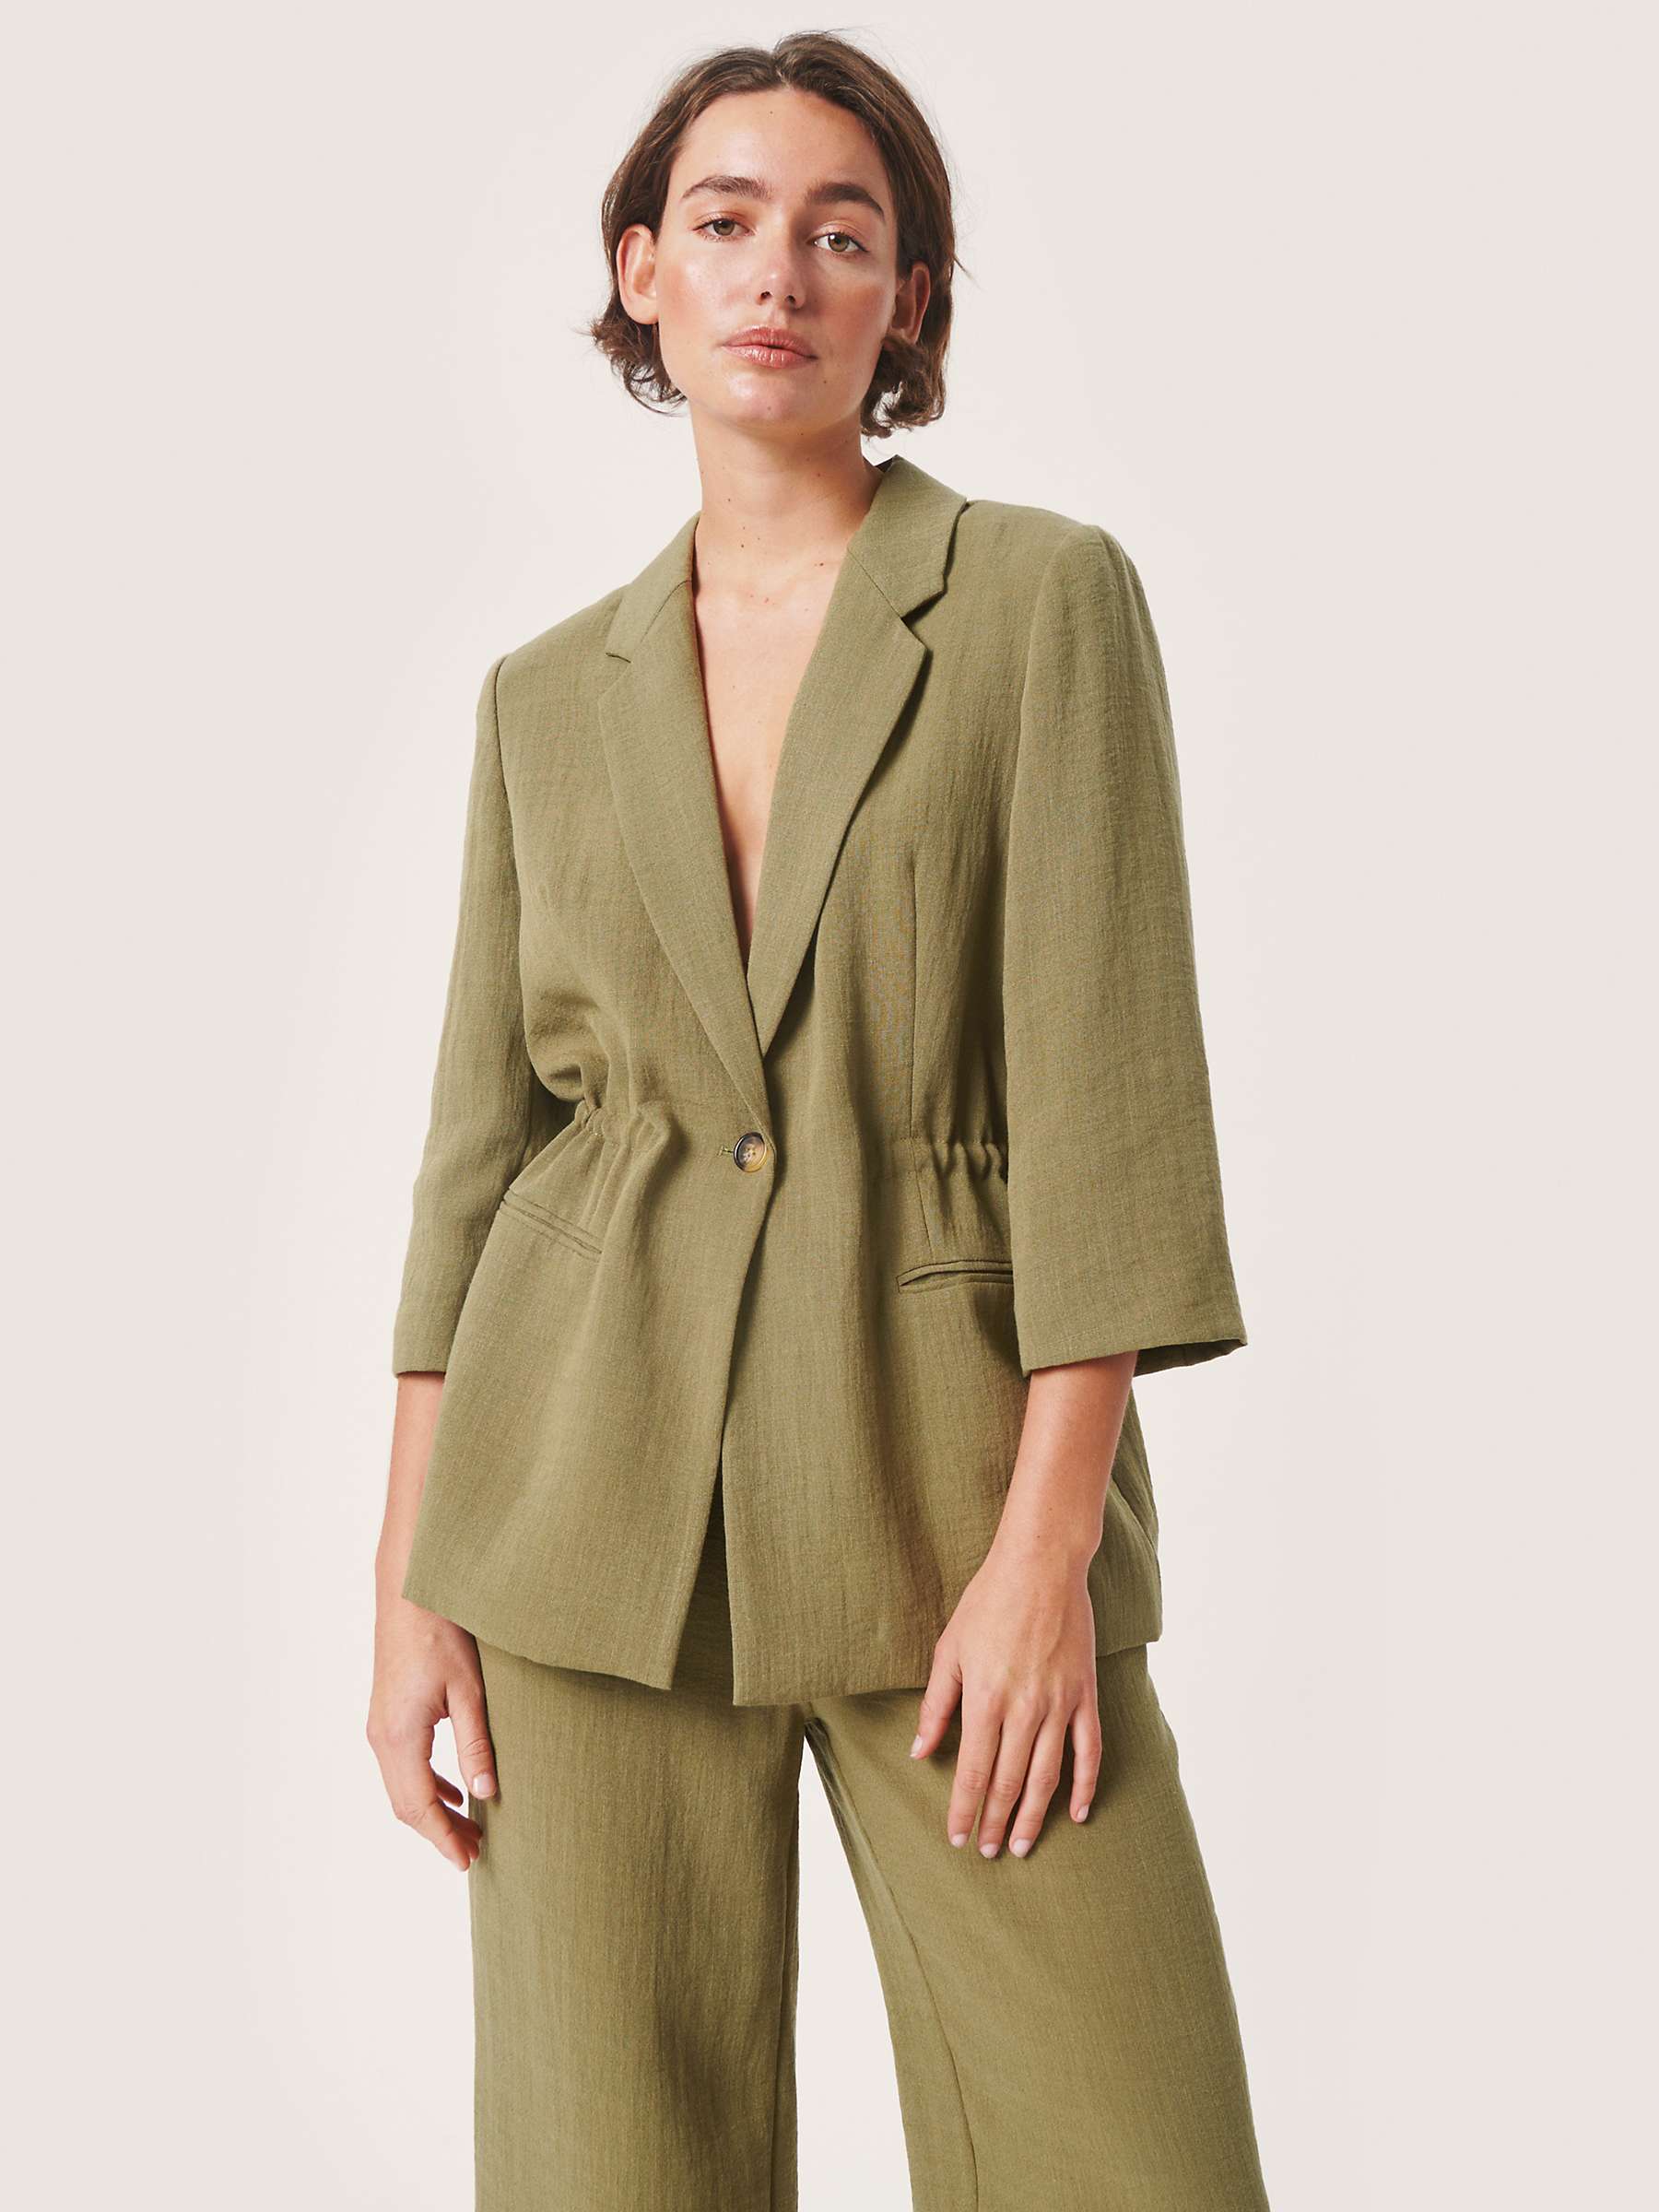 Buy Soaked In Luxury Camile Plain Blazer, Loden Green Online at johnlewis.com